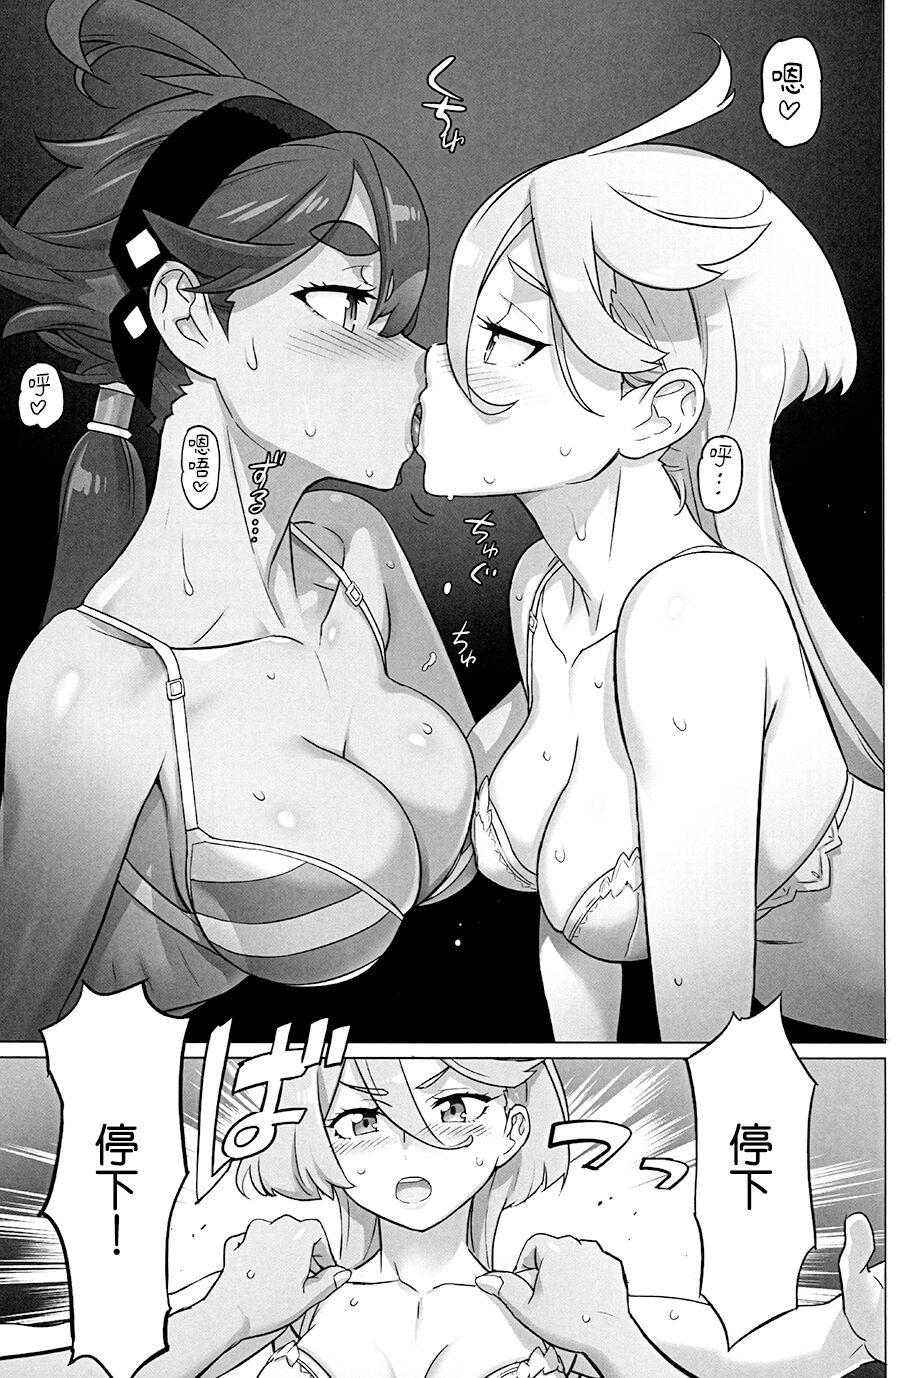 Sapphicerotica NIGHTDUEL! - Mobile suit gundam the witch from mercury Suckingcock - Page 2